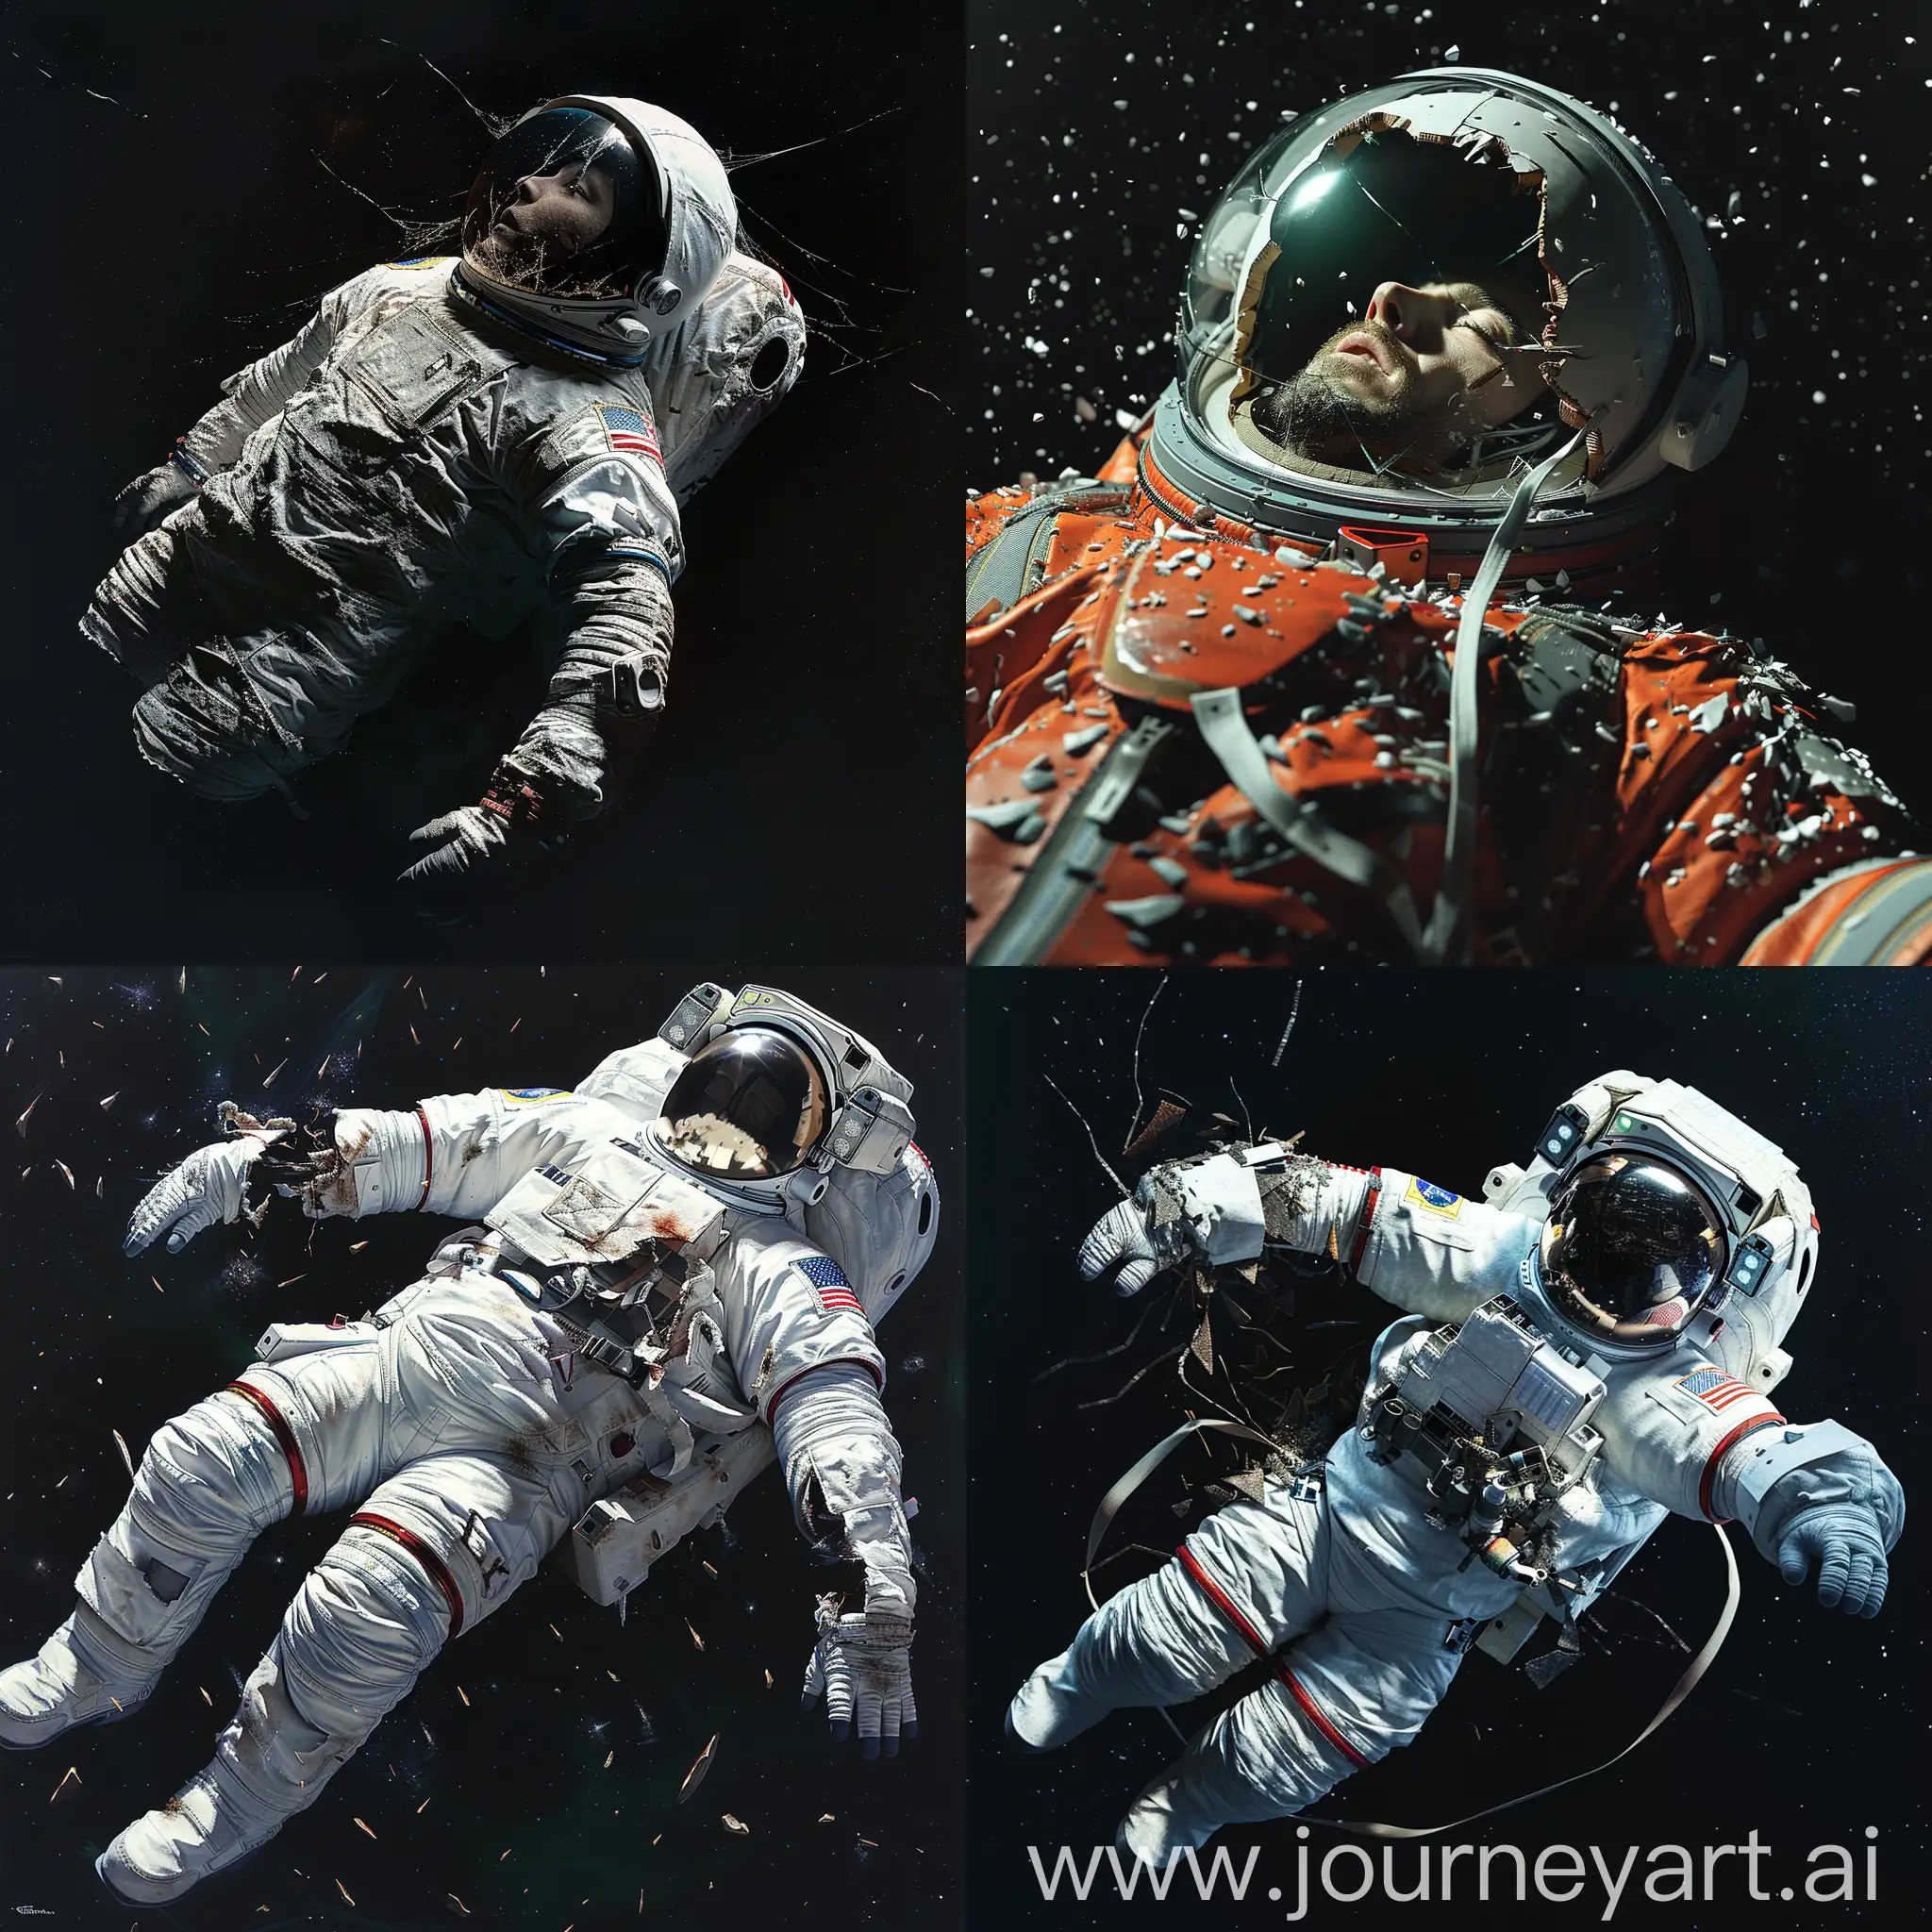 Serene-Astronaut-Floating-in-Space-with-Torn-Spacesuit-and-Cracked-Helmet